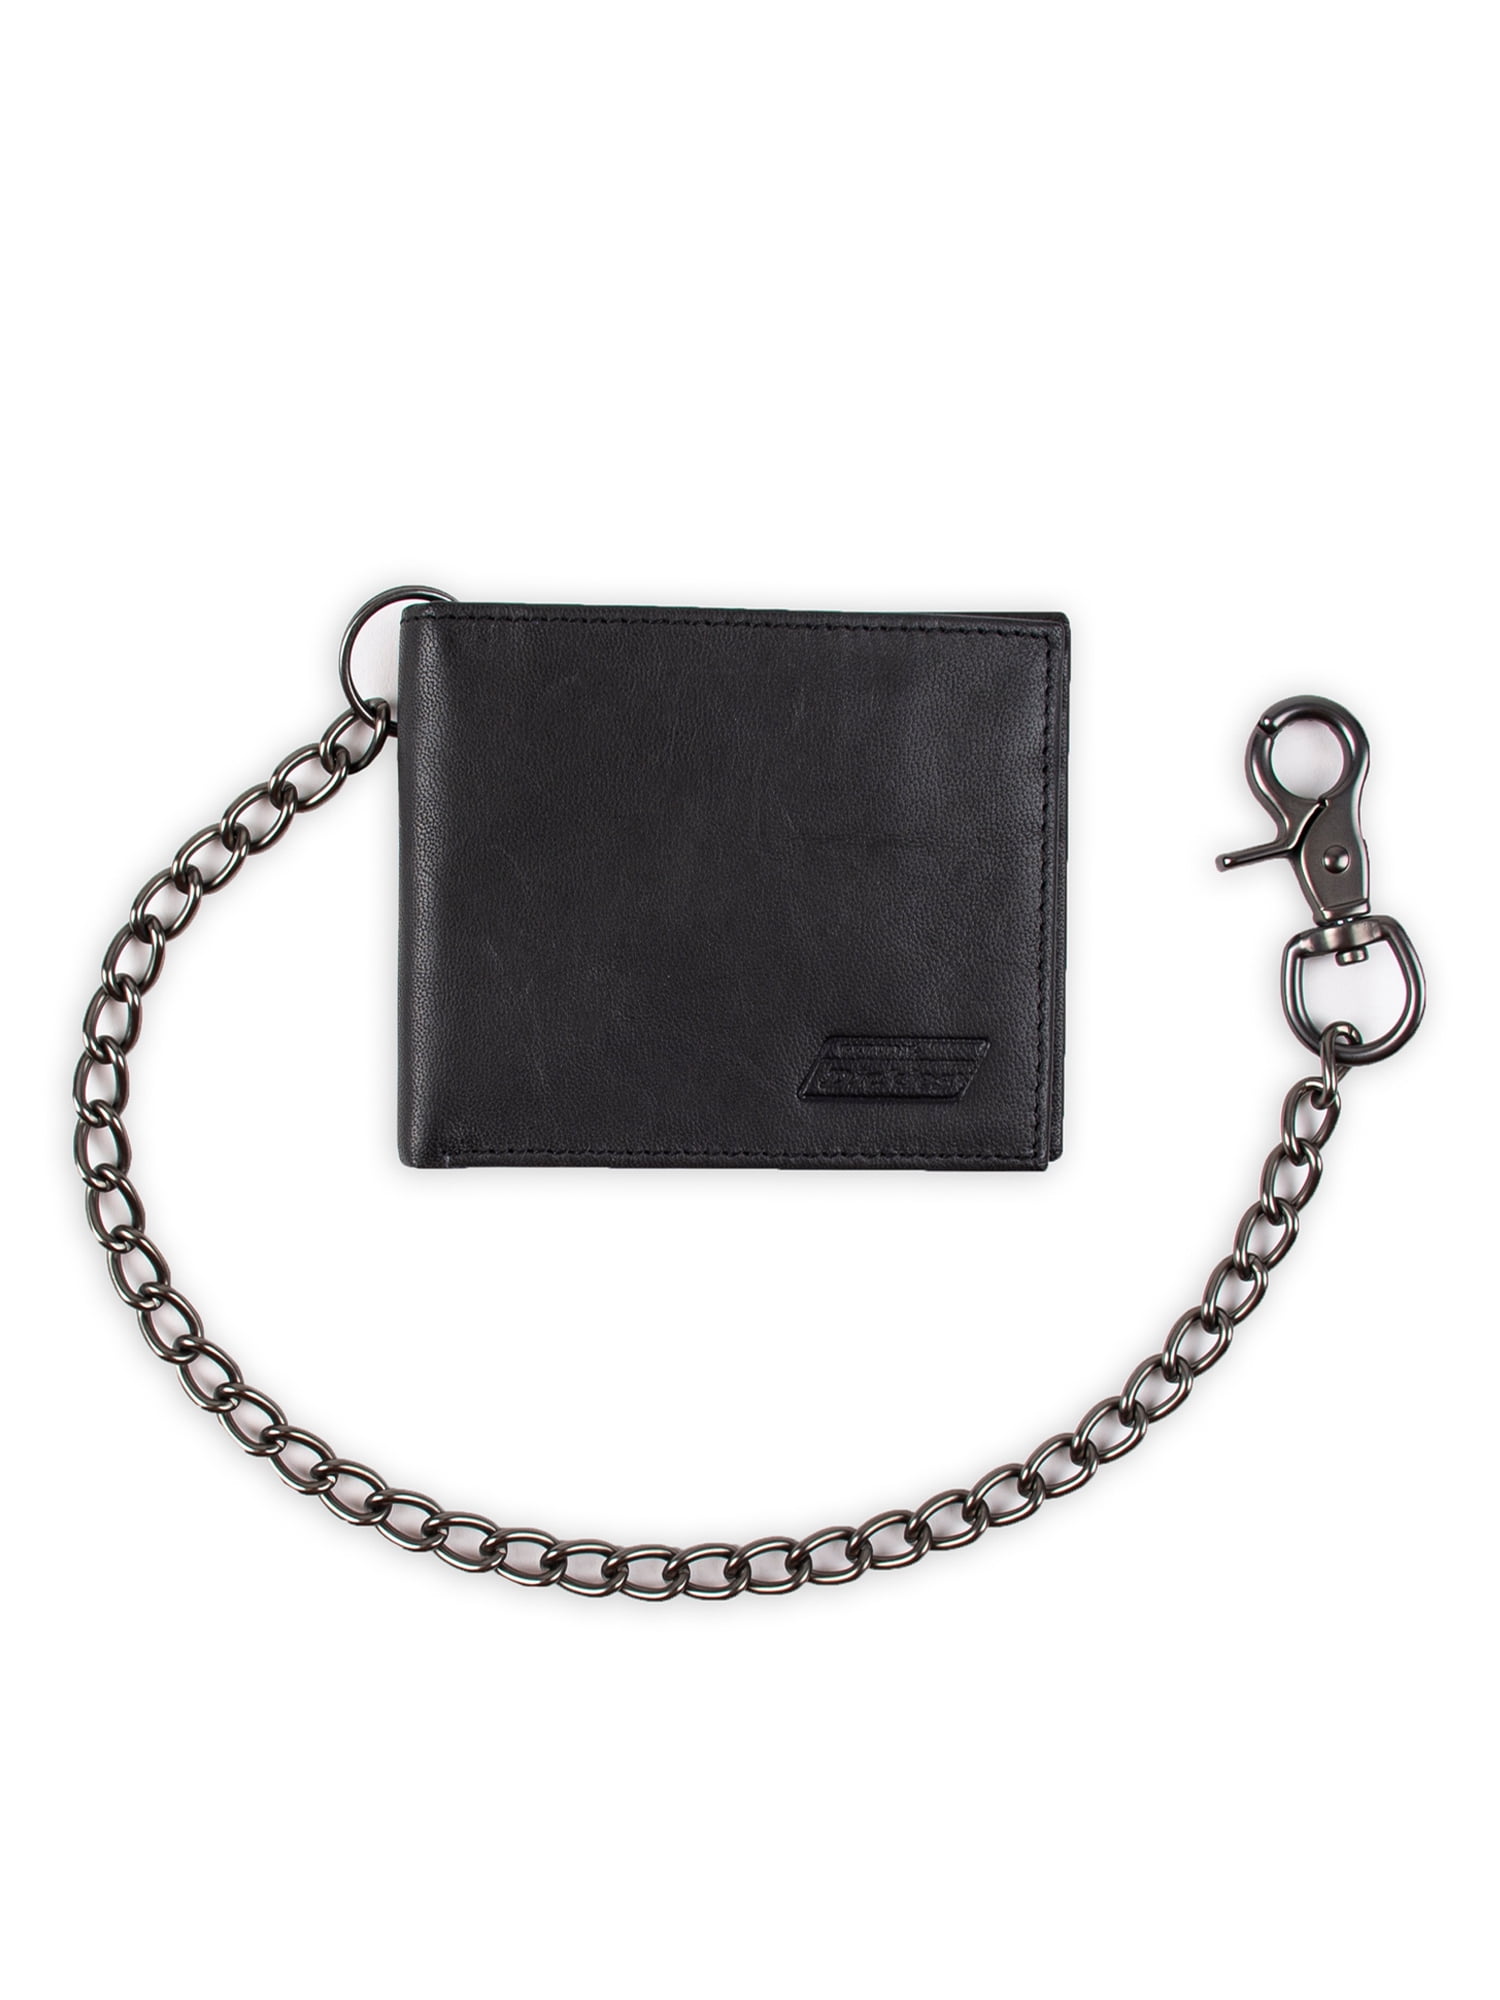 Genuine Dickies Men's Adult Slimfold Wallet with Chain Strap Black